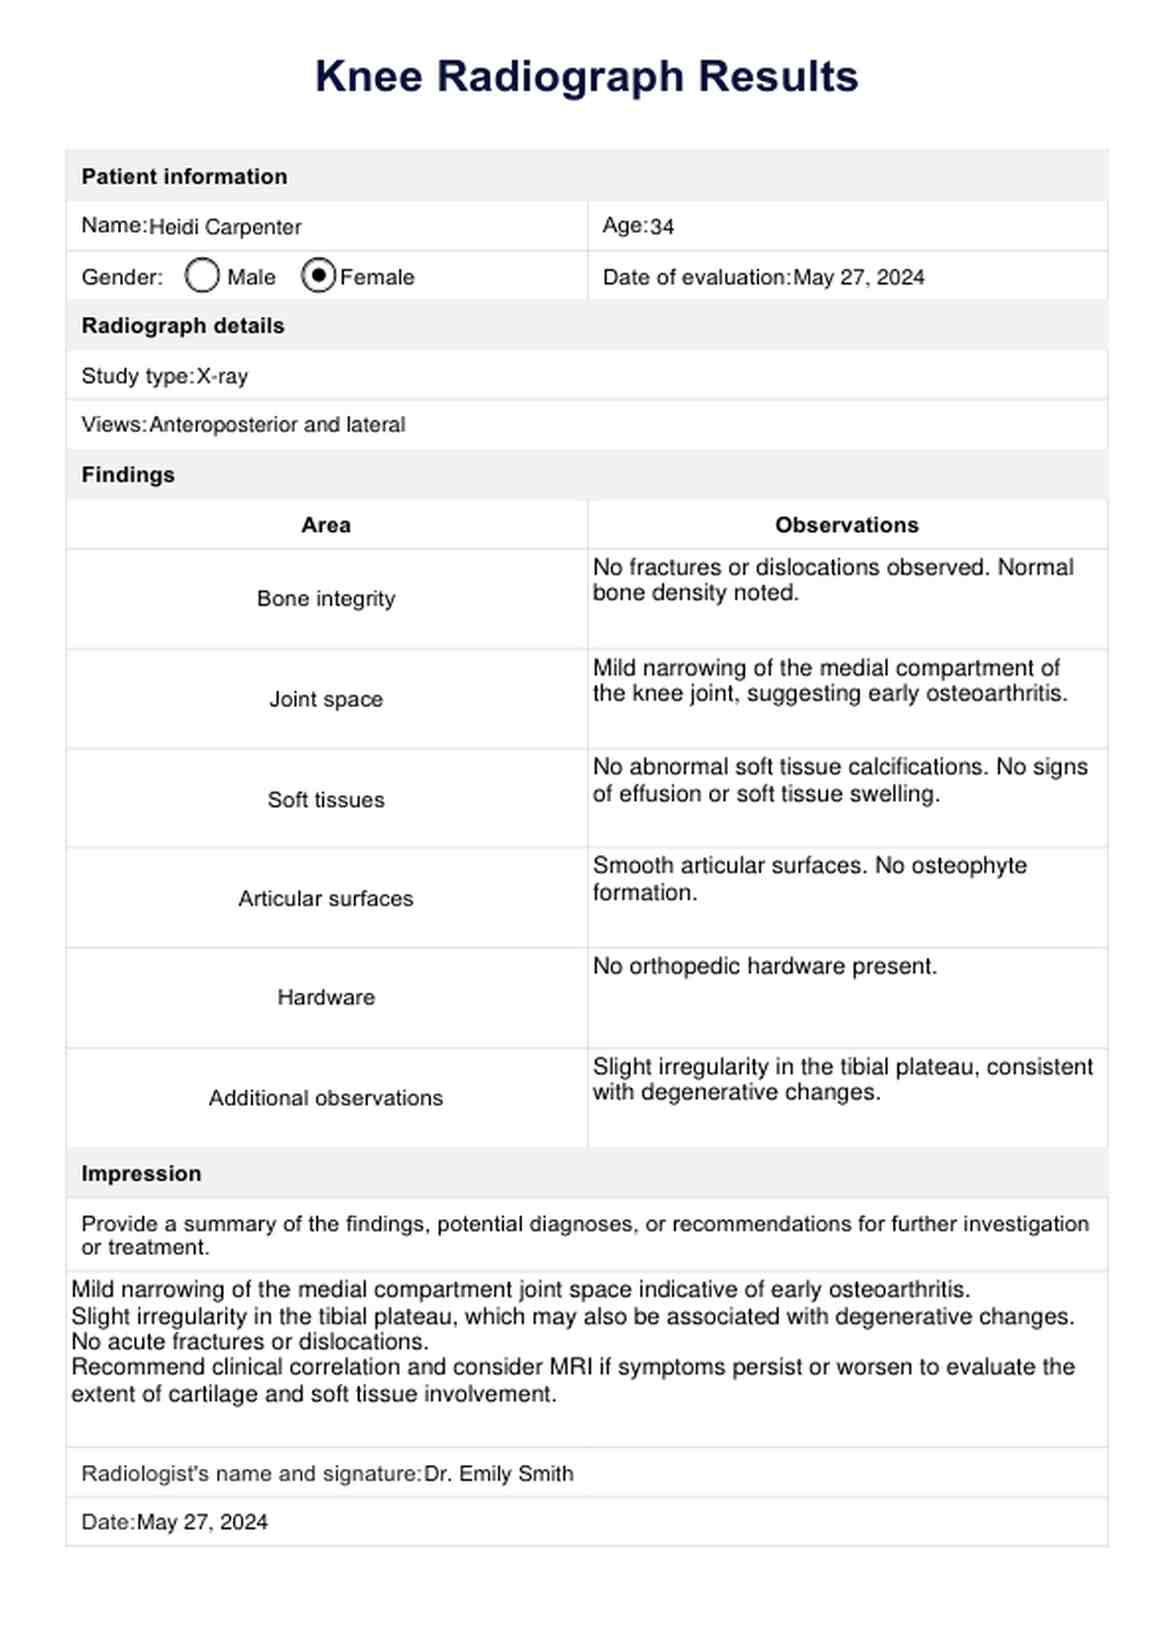 Knee Radiograph Results Template PDF Example